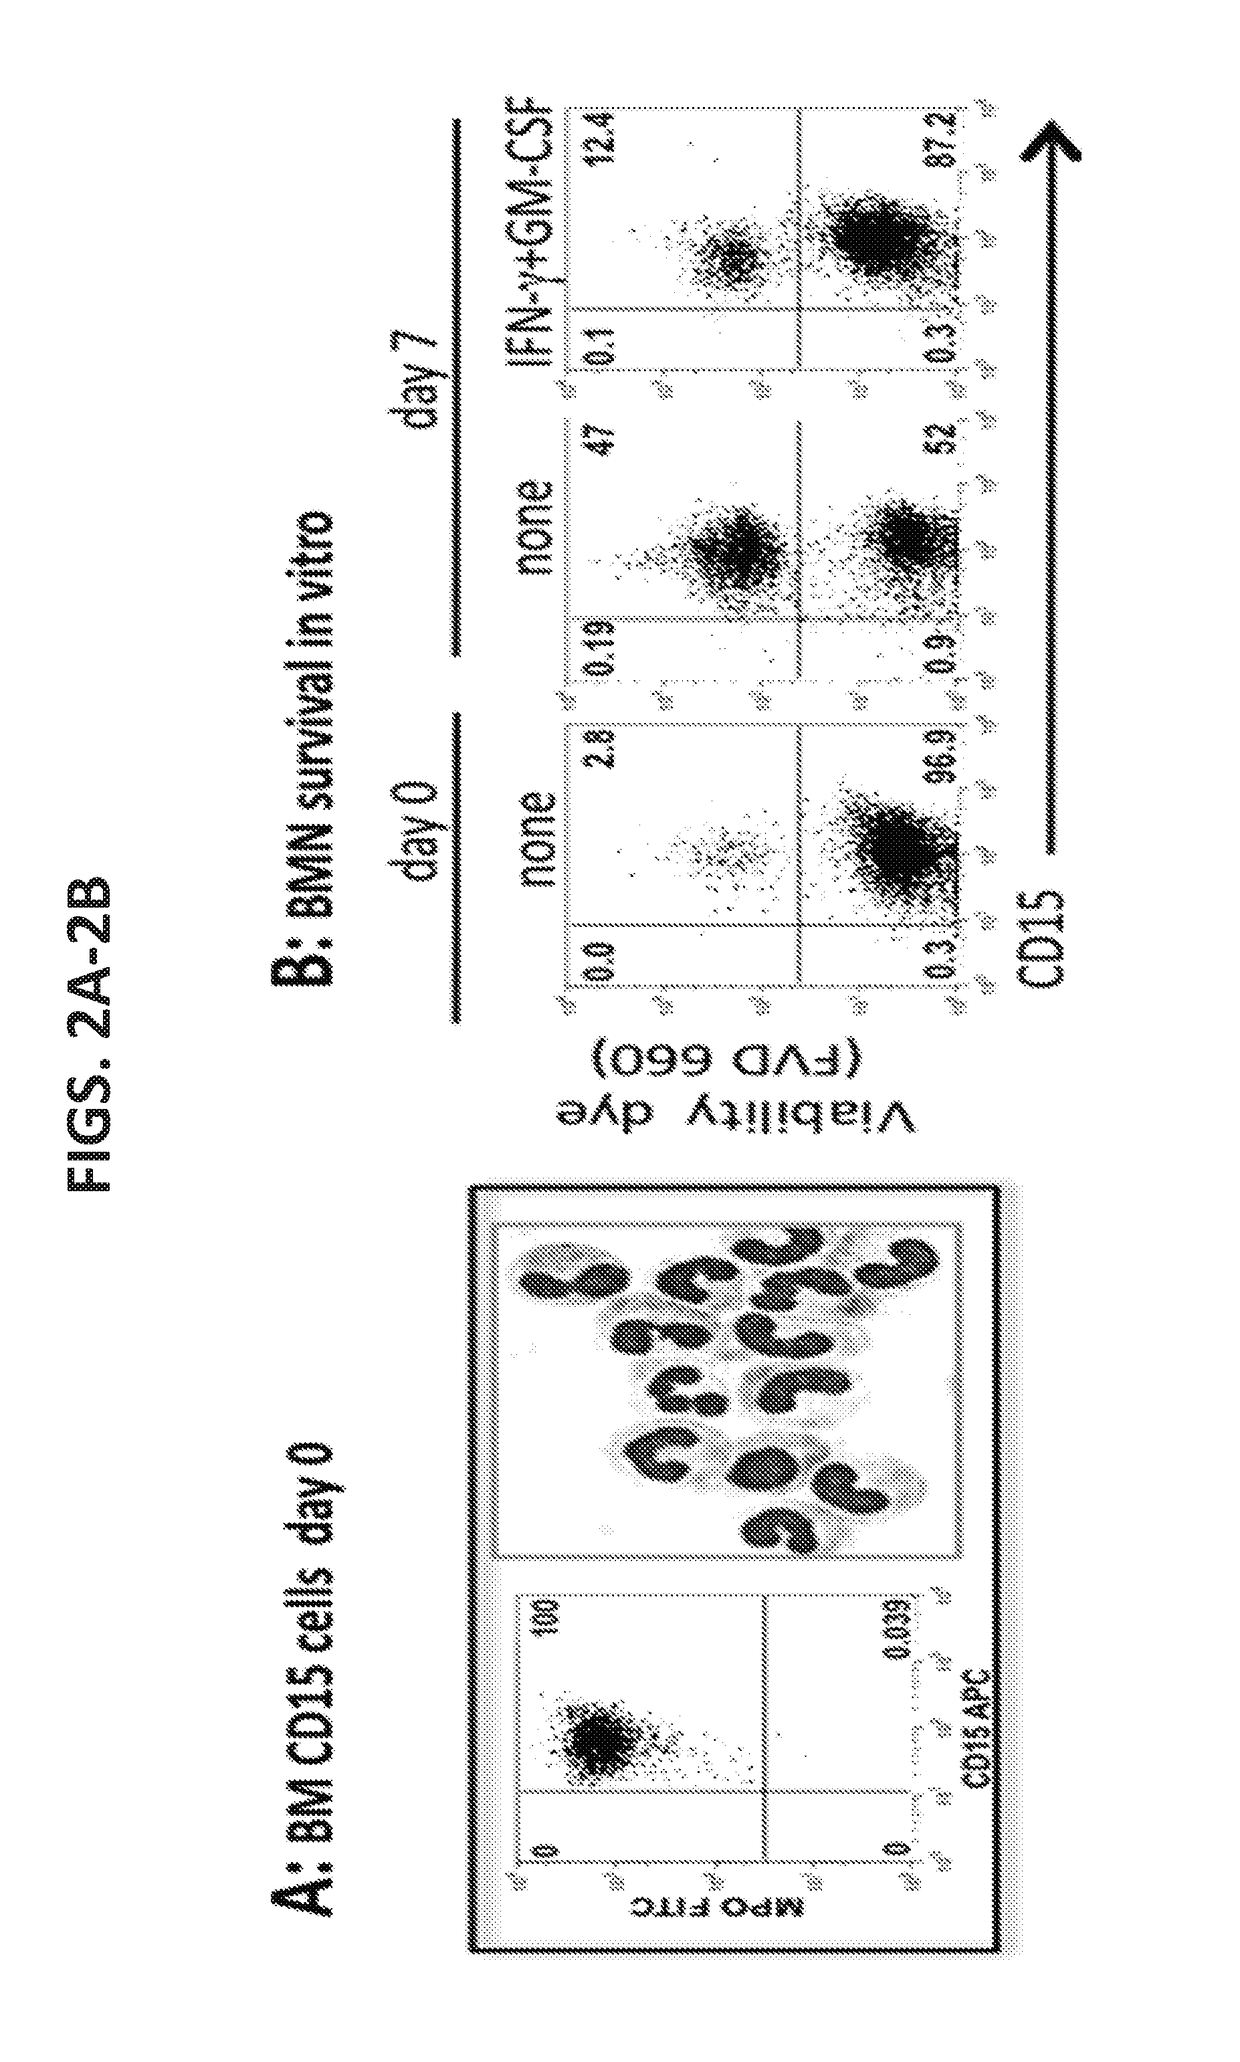 Compositions and methods of enhancing Anti-tumor response using hybrid neutrophils